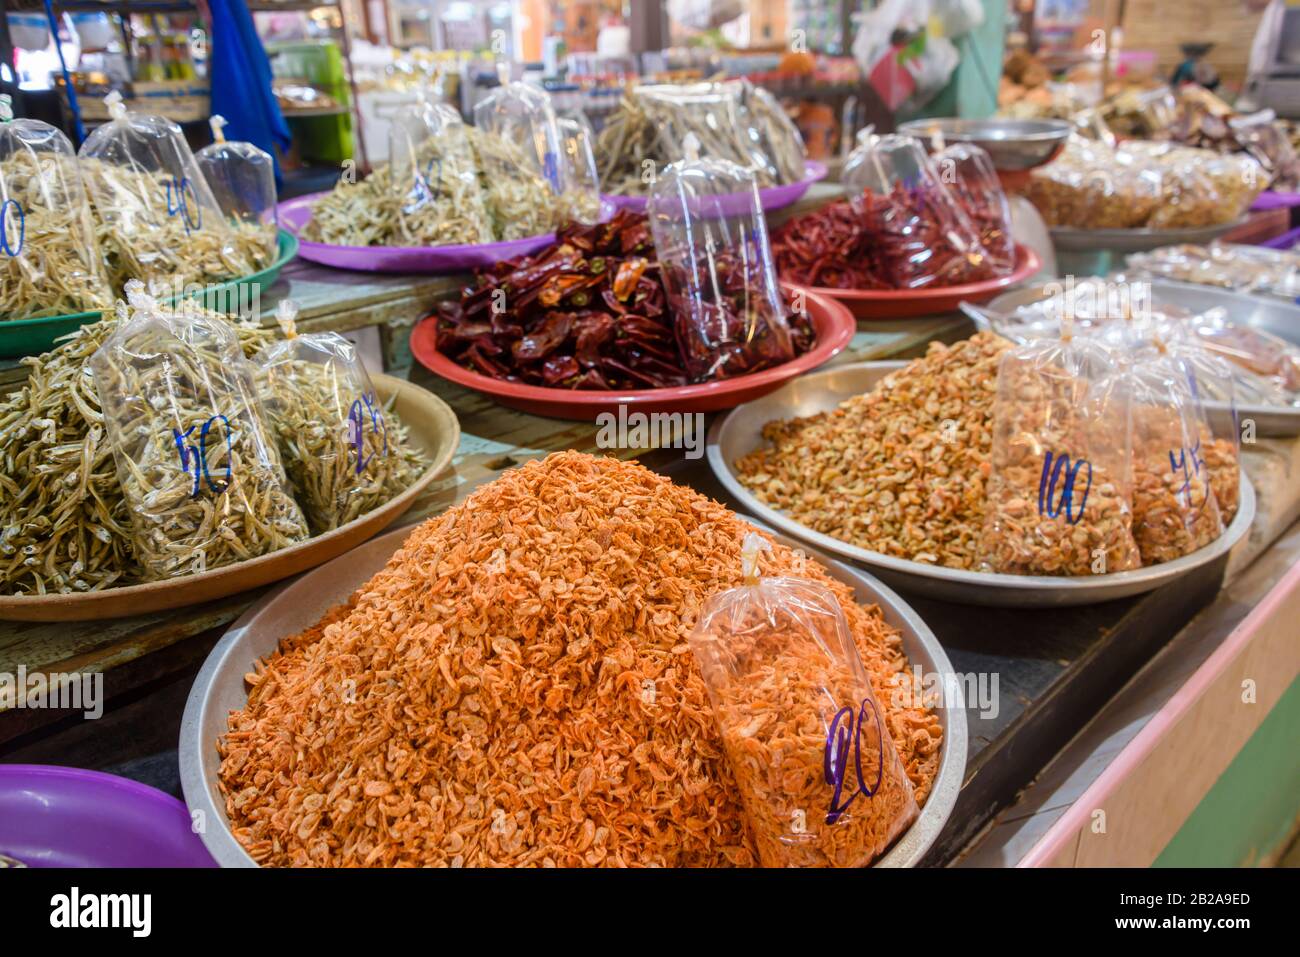 Bowls of cooked shrimp, prawns, anchovies and chilies for sale at a food market stall in Thailand Stock Photo